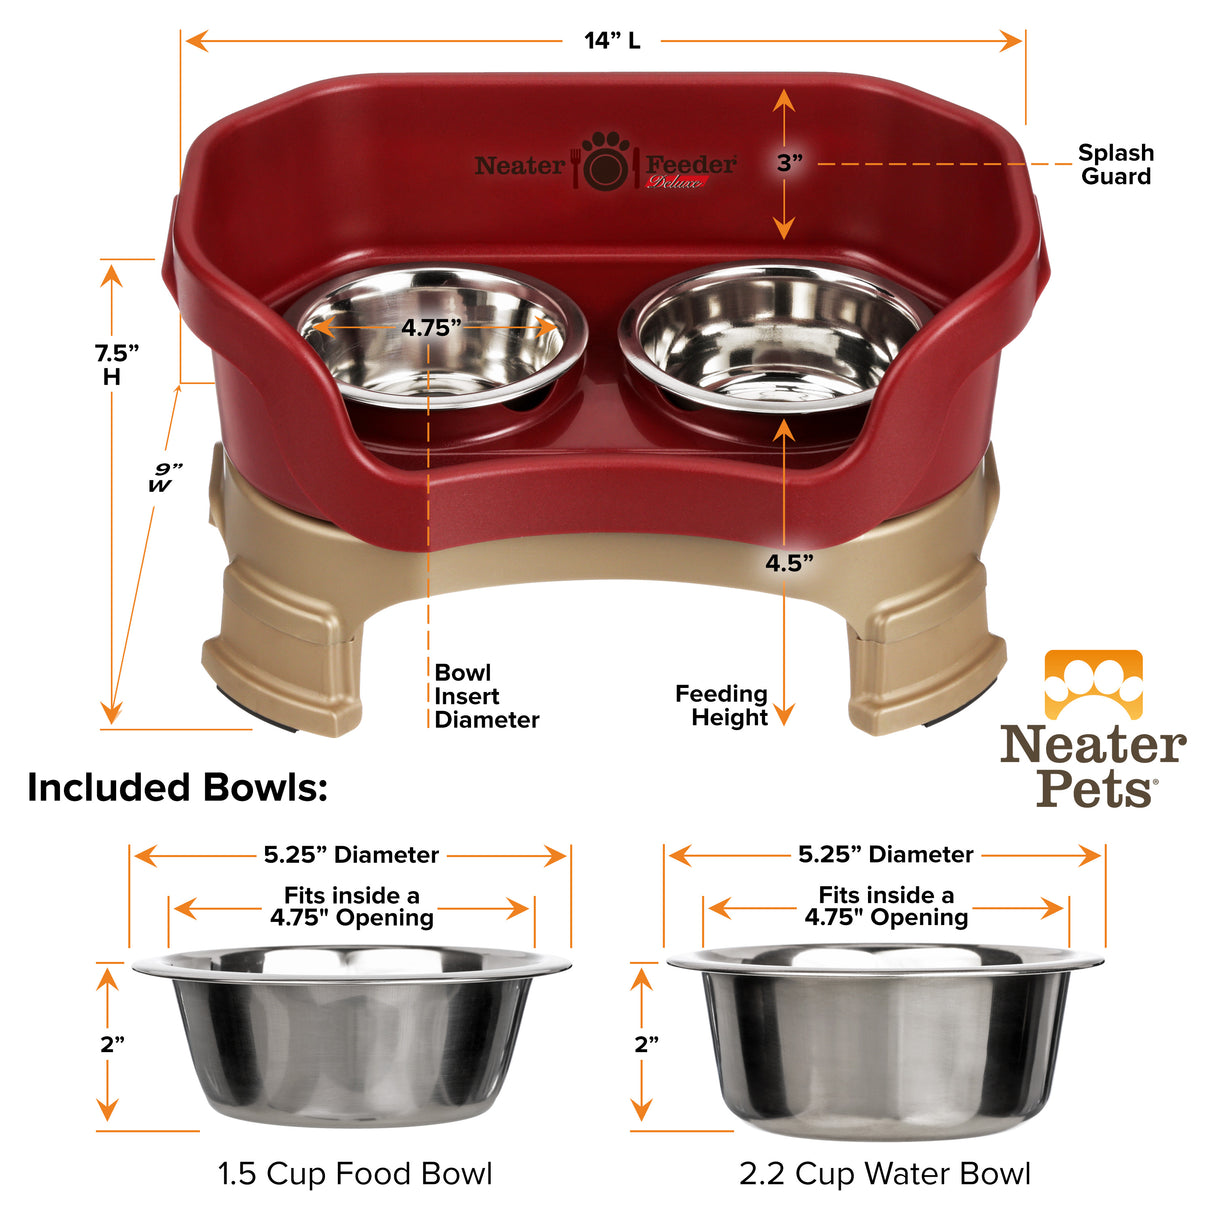 Deluxe Cranberry Small Dog Neater Feeder with leg extensions and Bowl dimensions